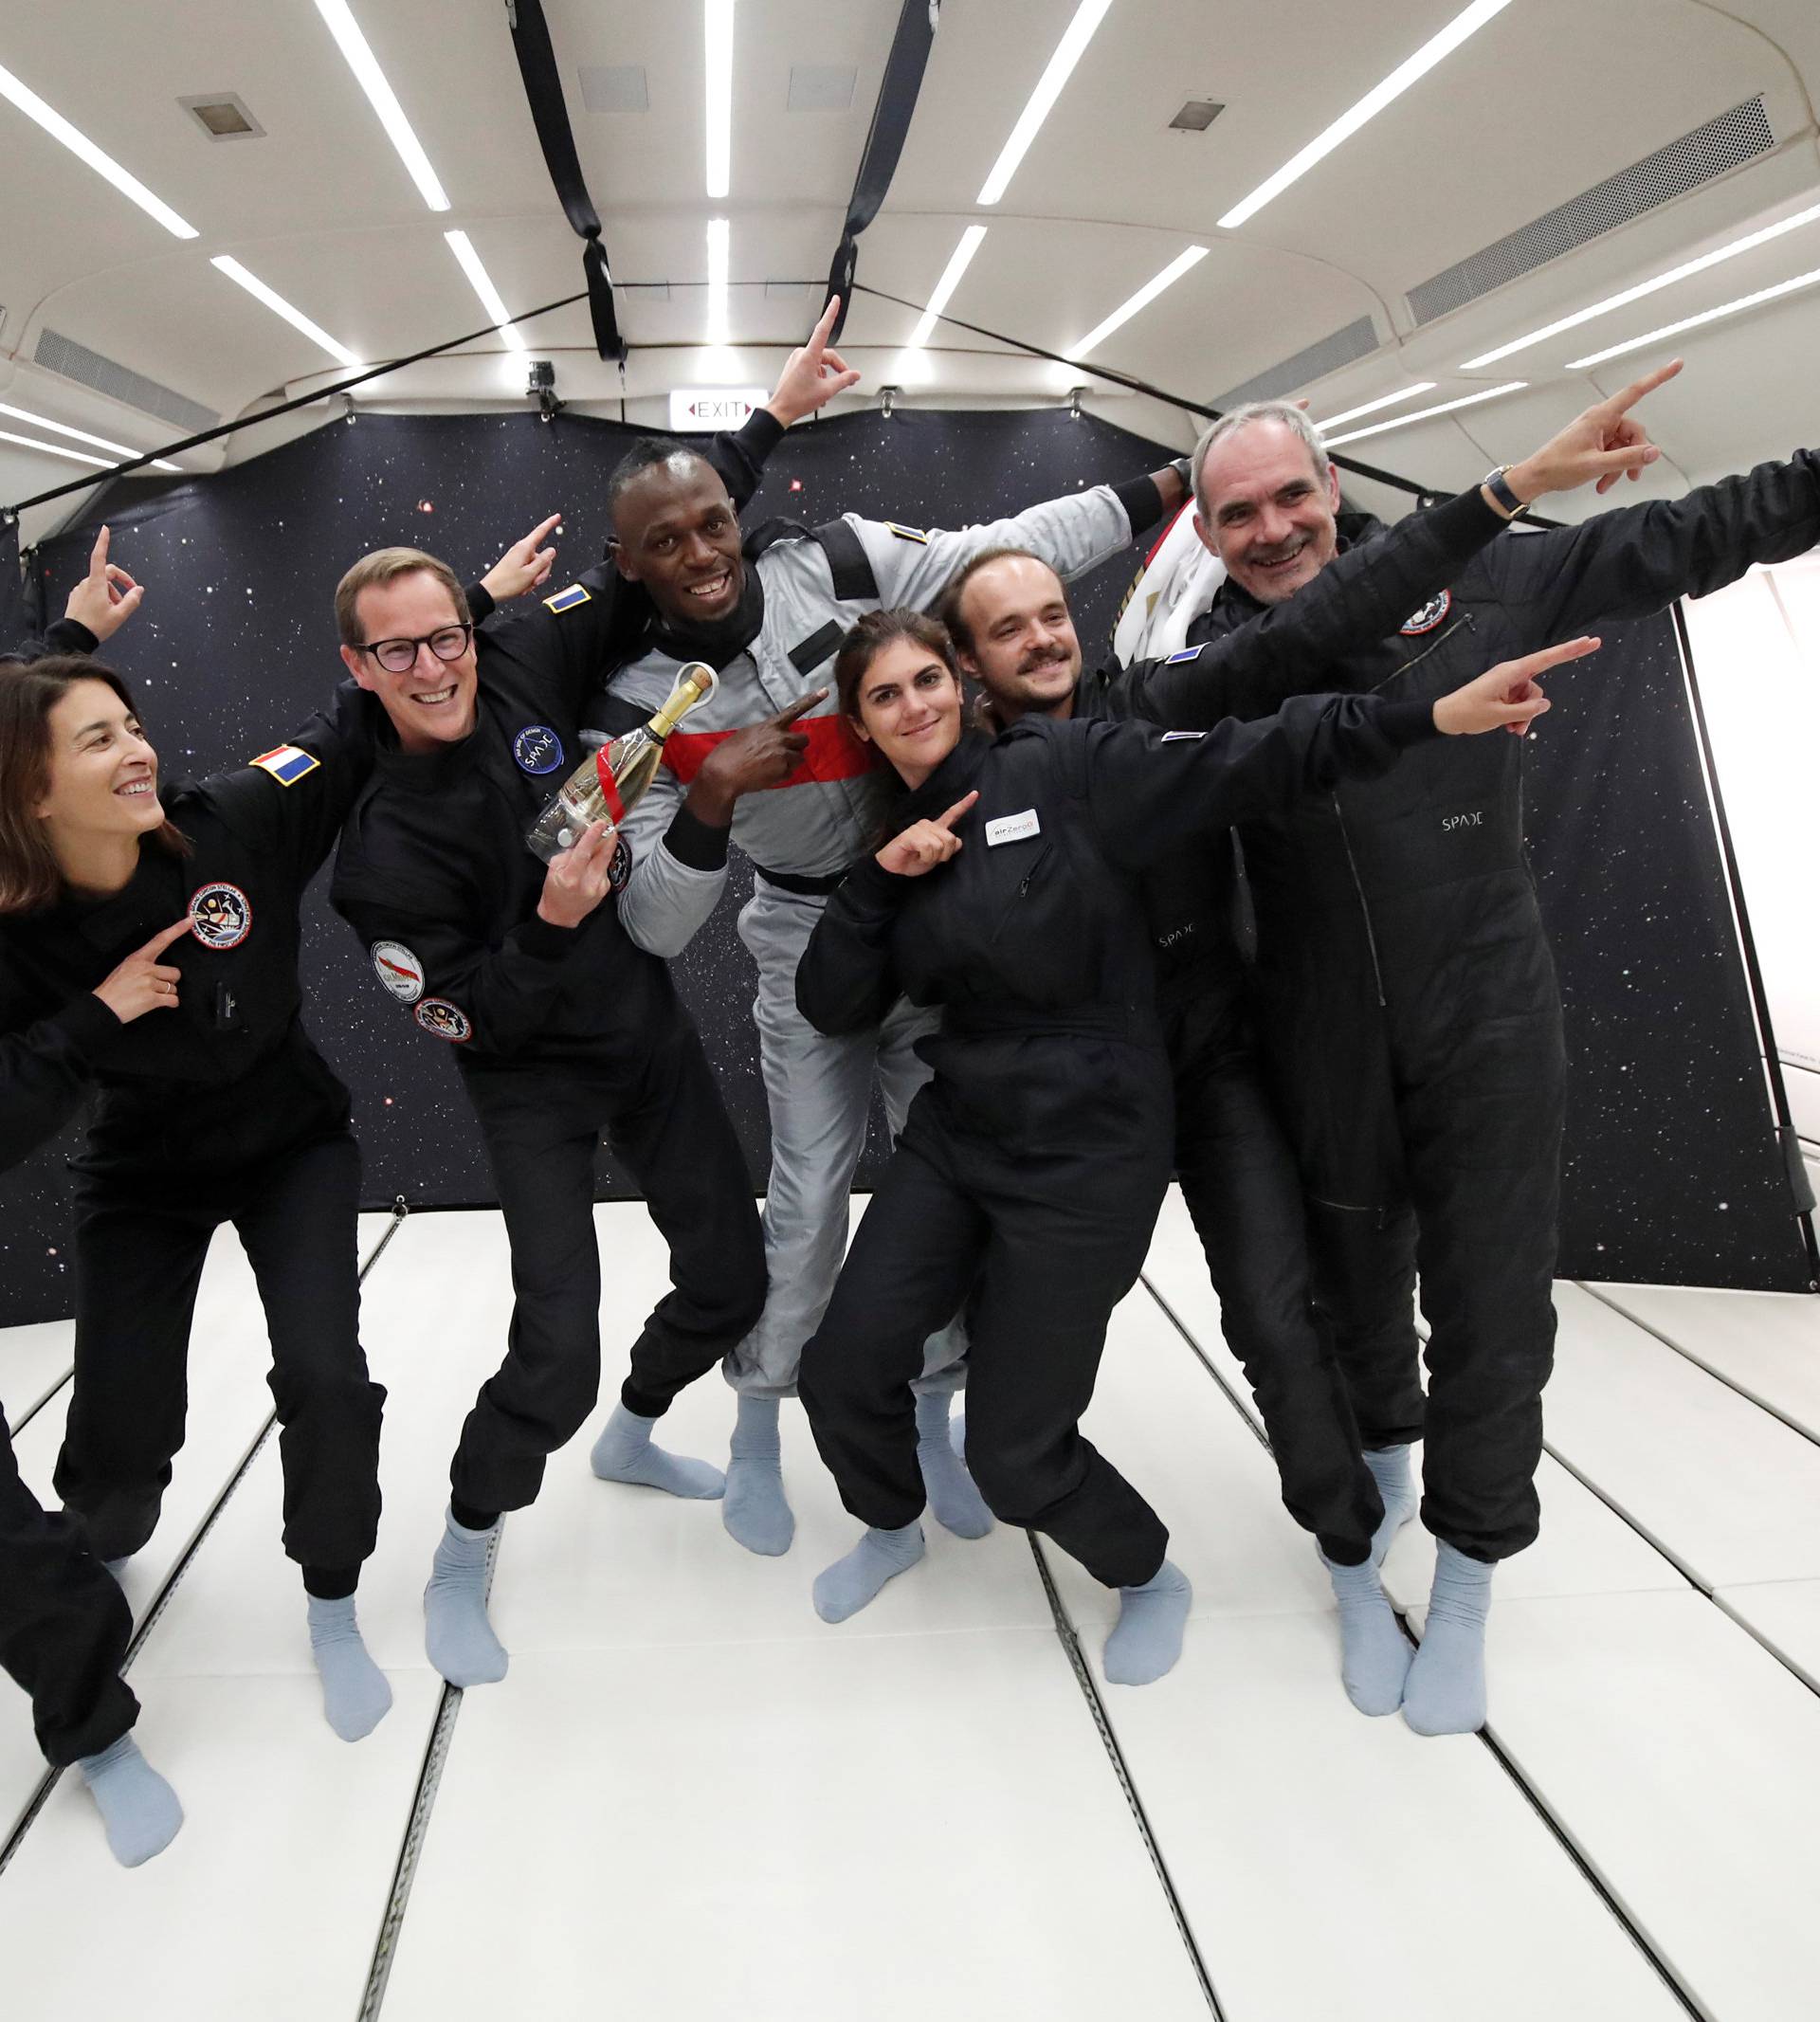 Retired sprinter Usain Bolt poses with staff members holding a bottle of "Mumm Grand Cordon Stellar" champagne after they enjoy zero gravity conditions during a flight in a specially modified Airbus Zero-G plane above Reims